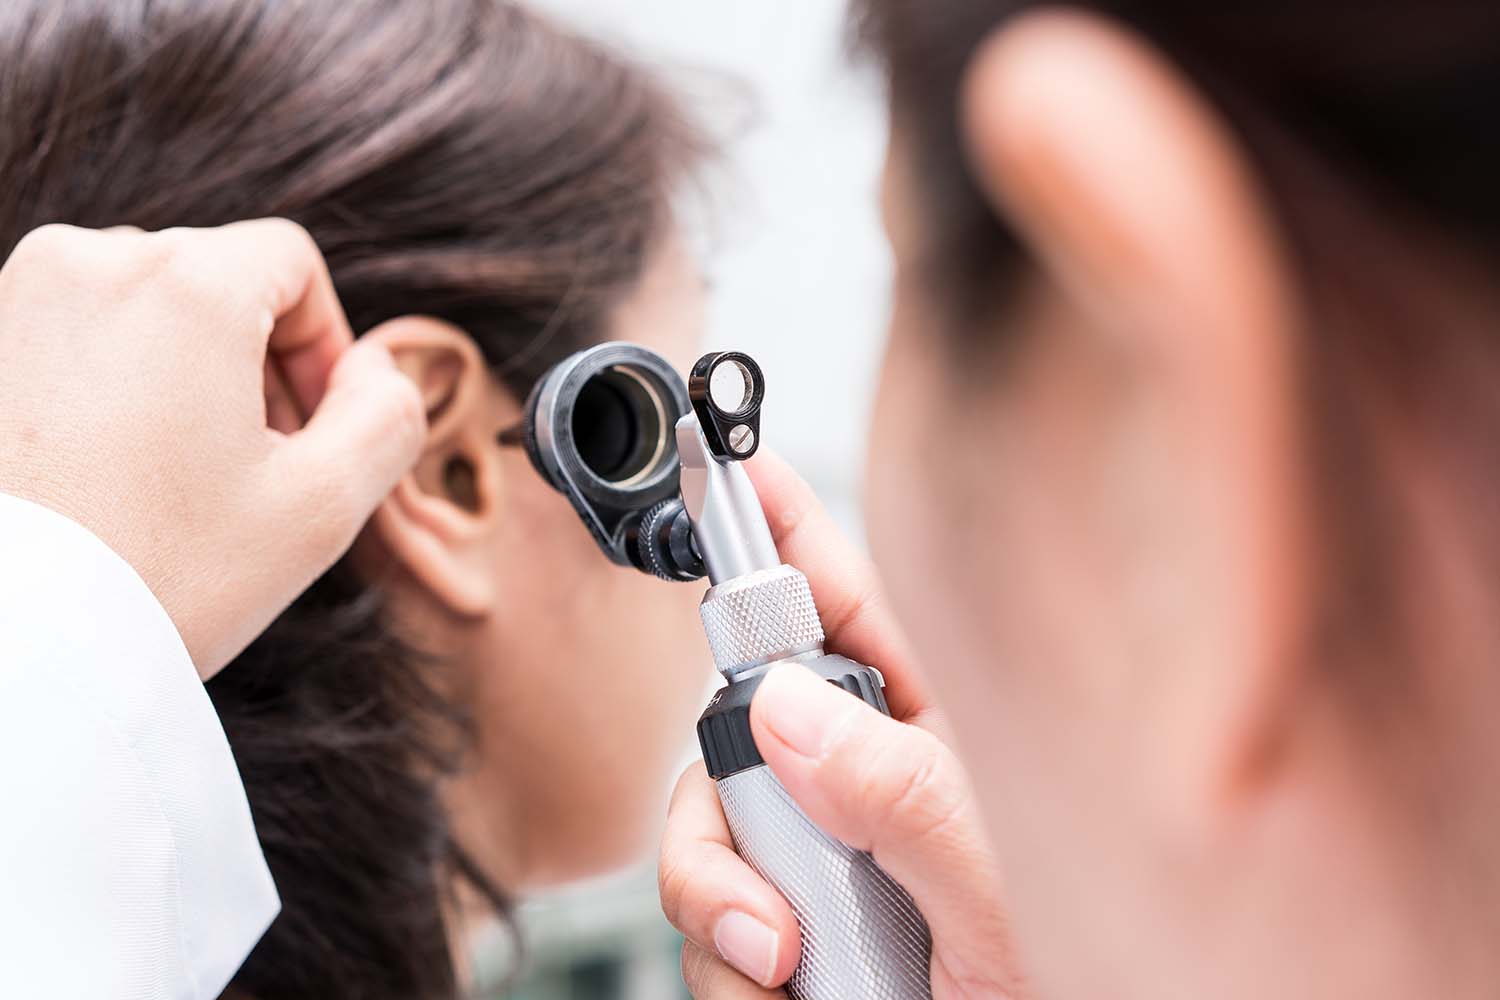 Ear wax removal - fast and friendly service in Thornbury